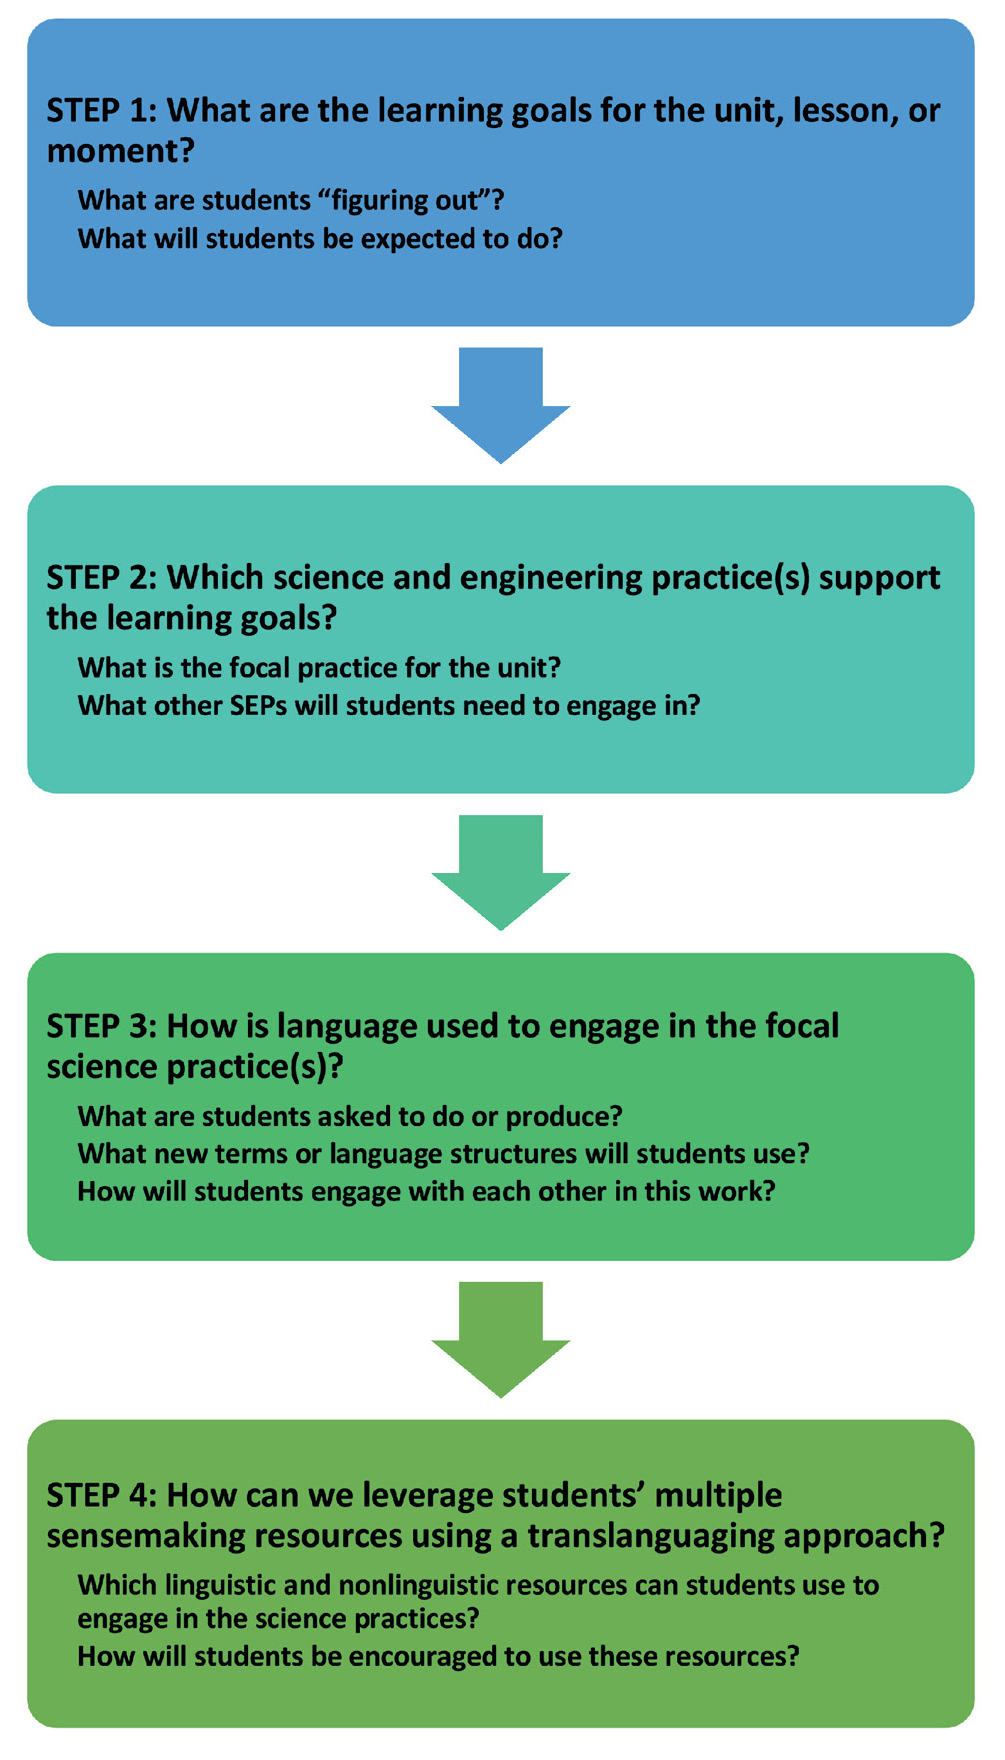 Steps for redesigning a lesson plan using a translanguaging approach.